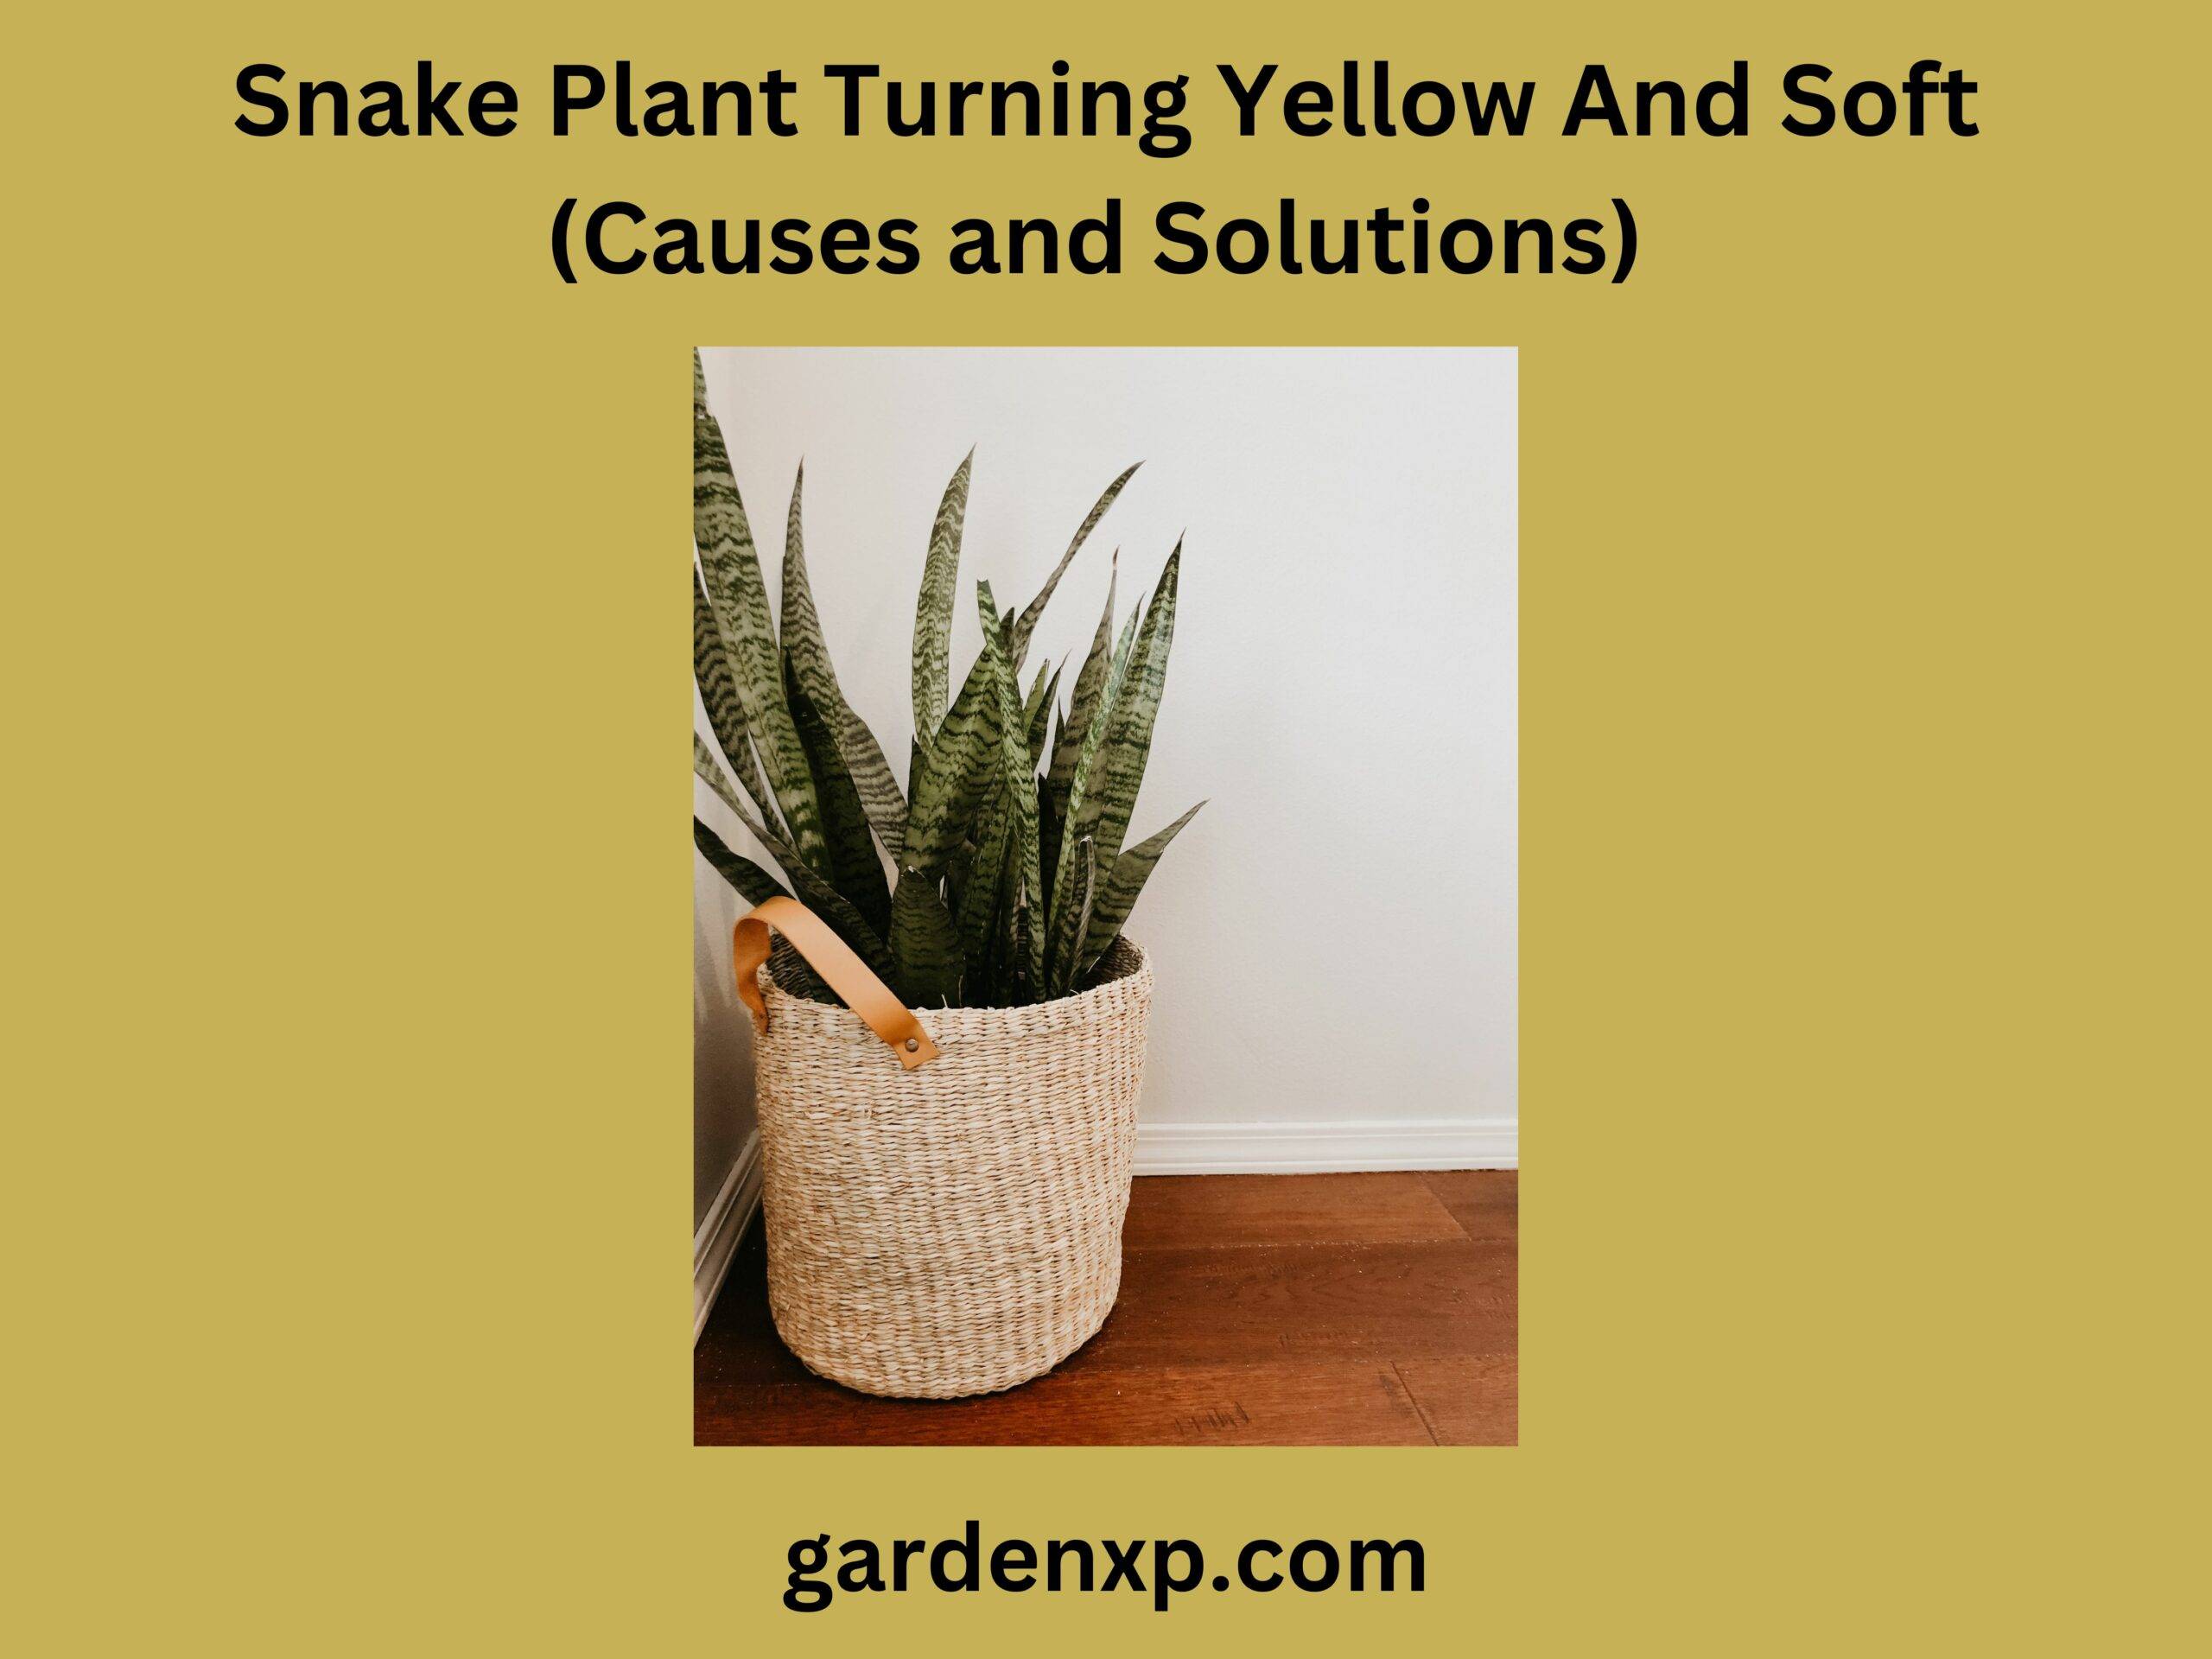 Snake Plant Turning Yellow And Soft (Causes and Solutions)